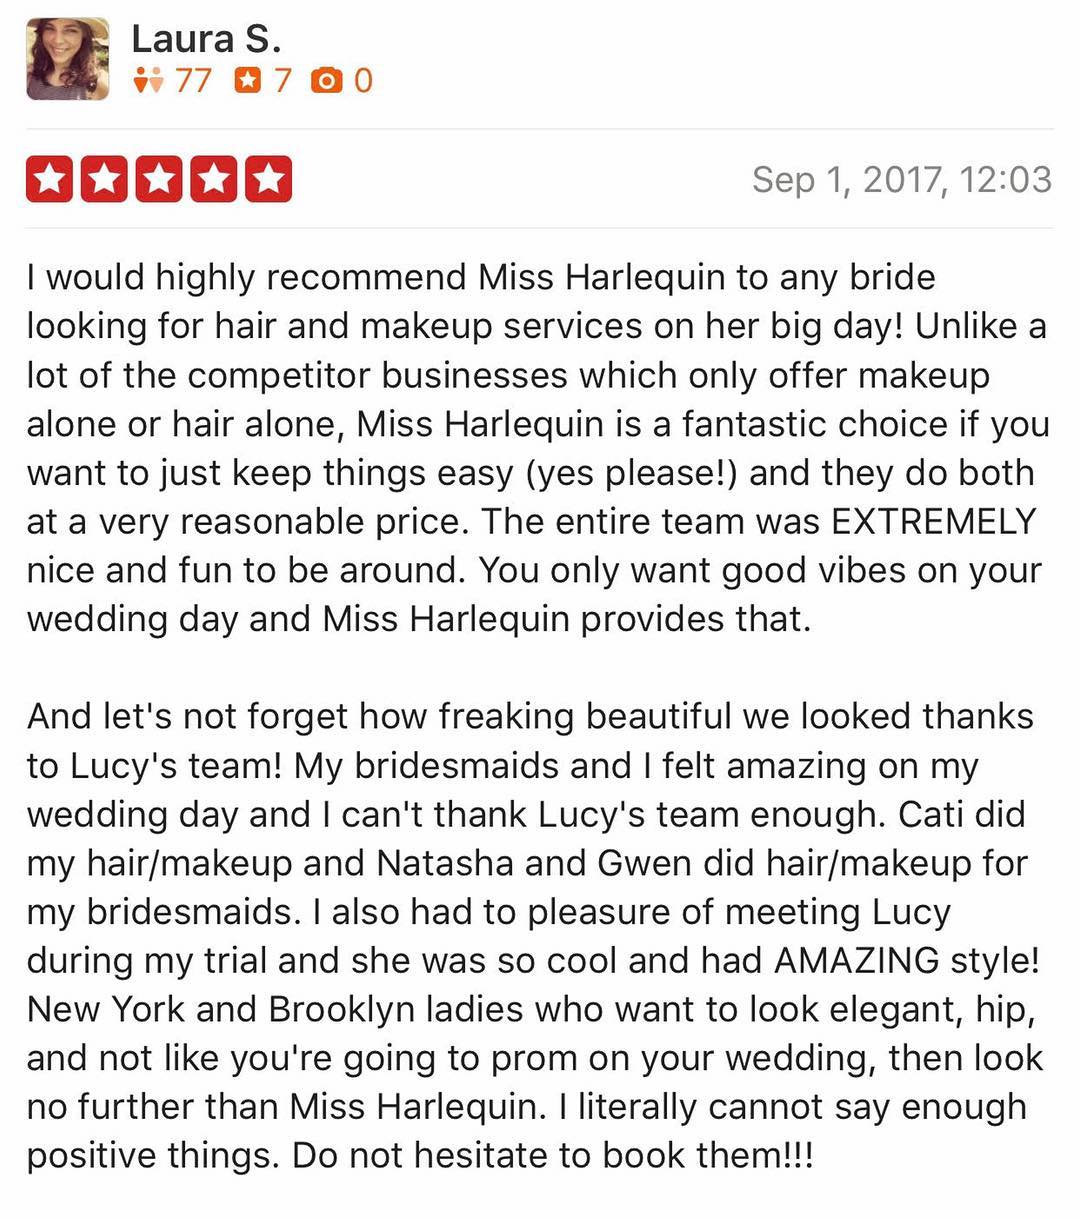 Settle into your Sunday evening of Wedding makeup & hair research, here’s a 5 star review to help you narrow your choices